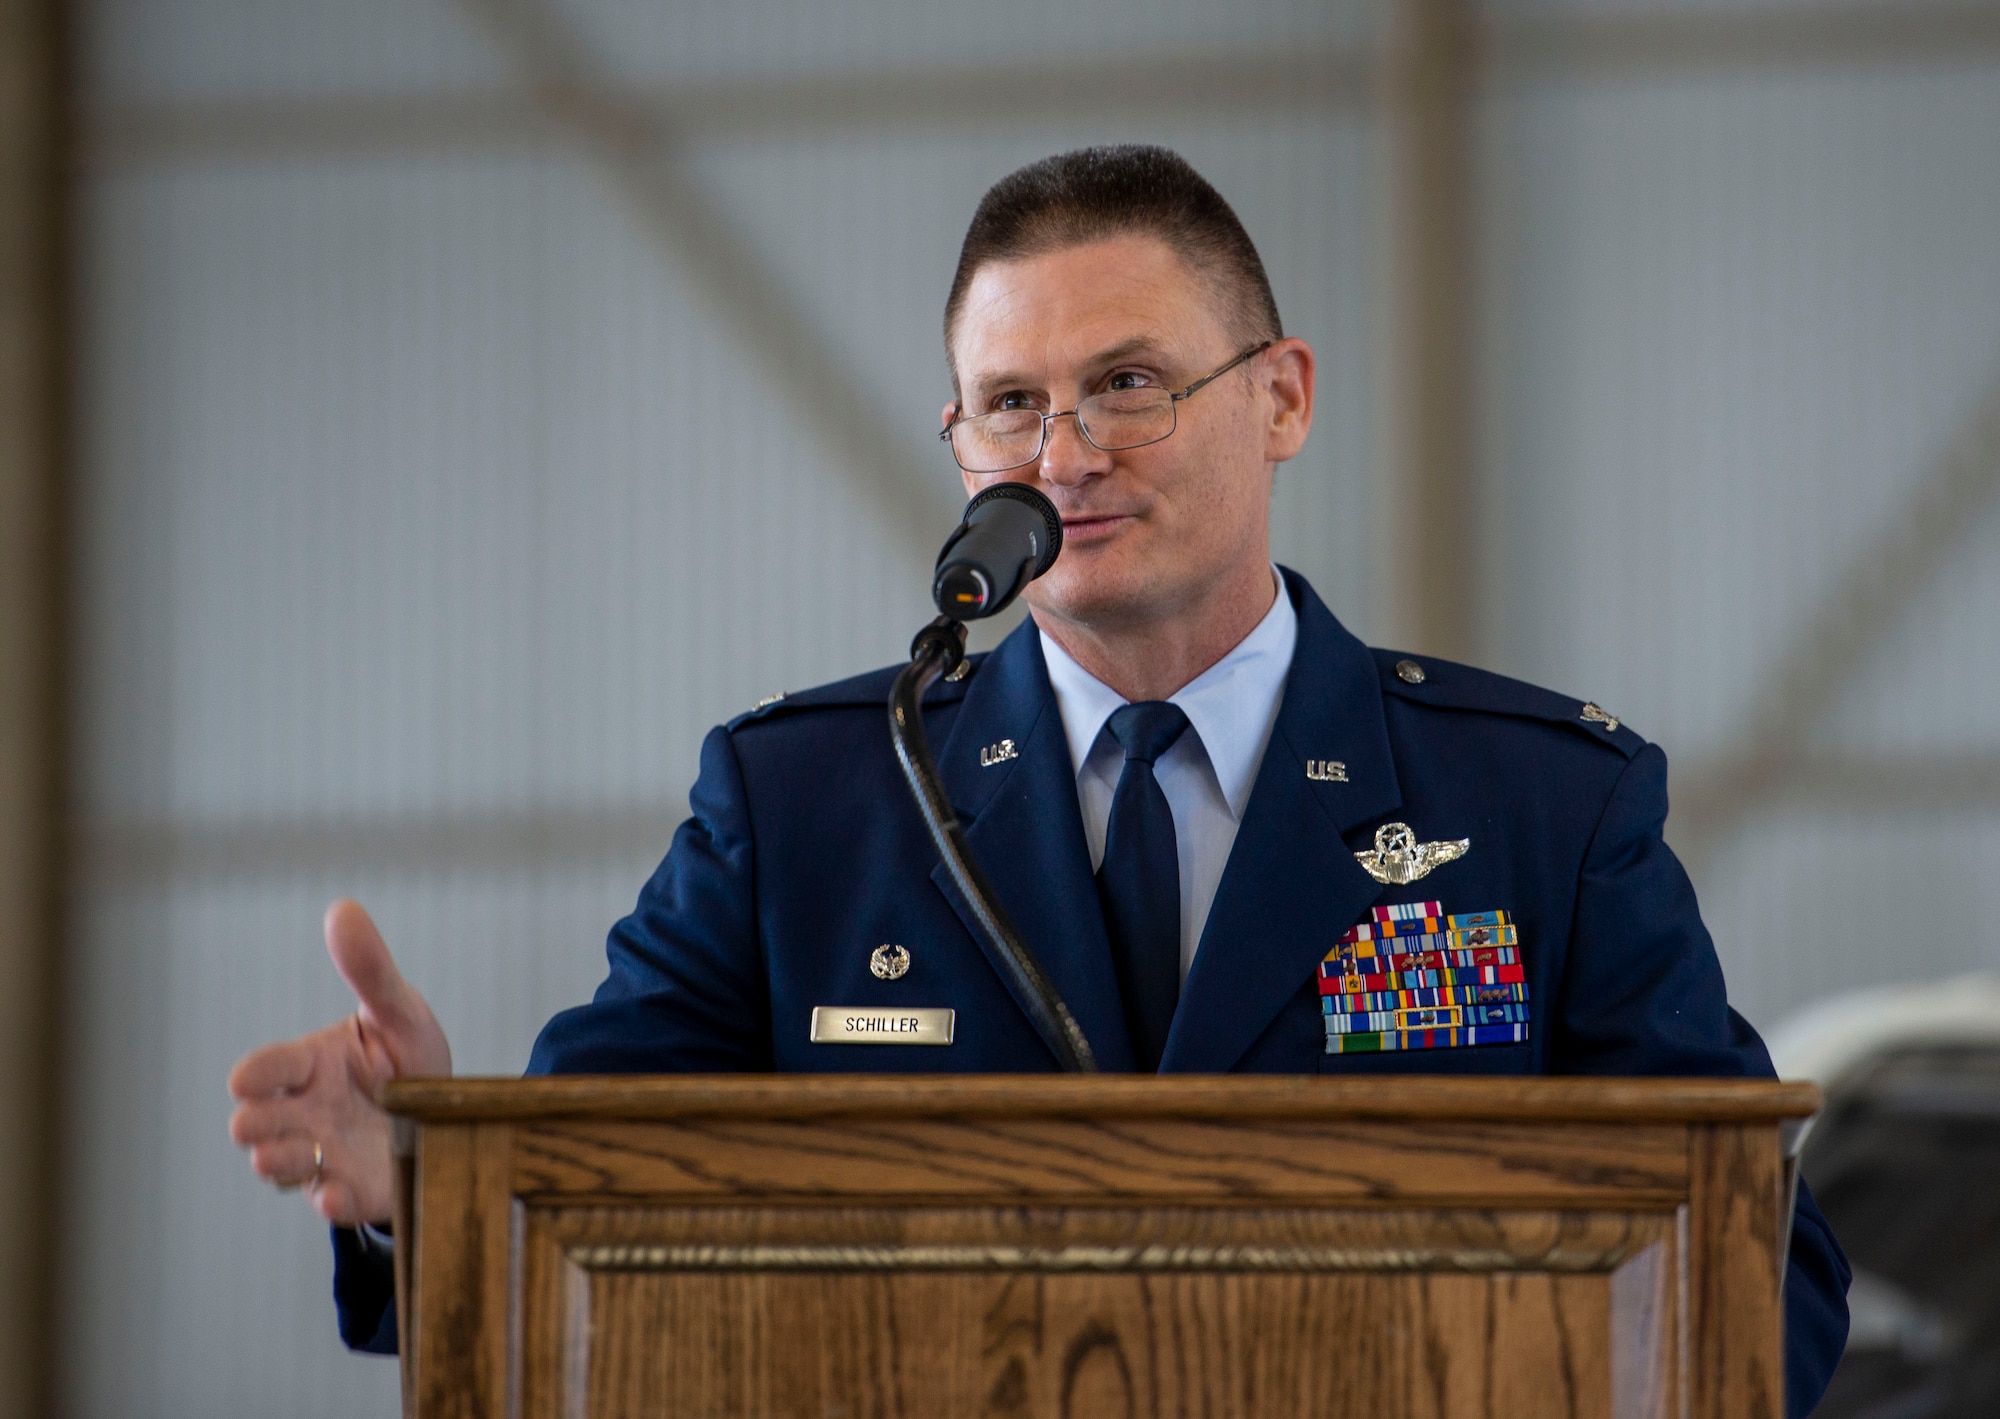 Col. Kevin Schiller, 375th Operations Group commander, speaks during the 457th Airlift Squadron inactivation ceremony at Joint Base Andrews, Maryland, June 14, 2019.  The unit was inactivated as part of a consolidation effort of the C-21 inventory. The last of the four C-21s located at Andrews will arrive at Scott Air Force Base on June 18 to make a total of 14 C-21s. (U.S. Air Force photo by Senior Airman Chad Gorecki)